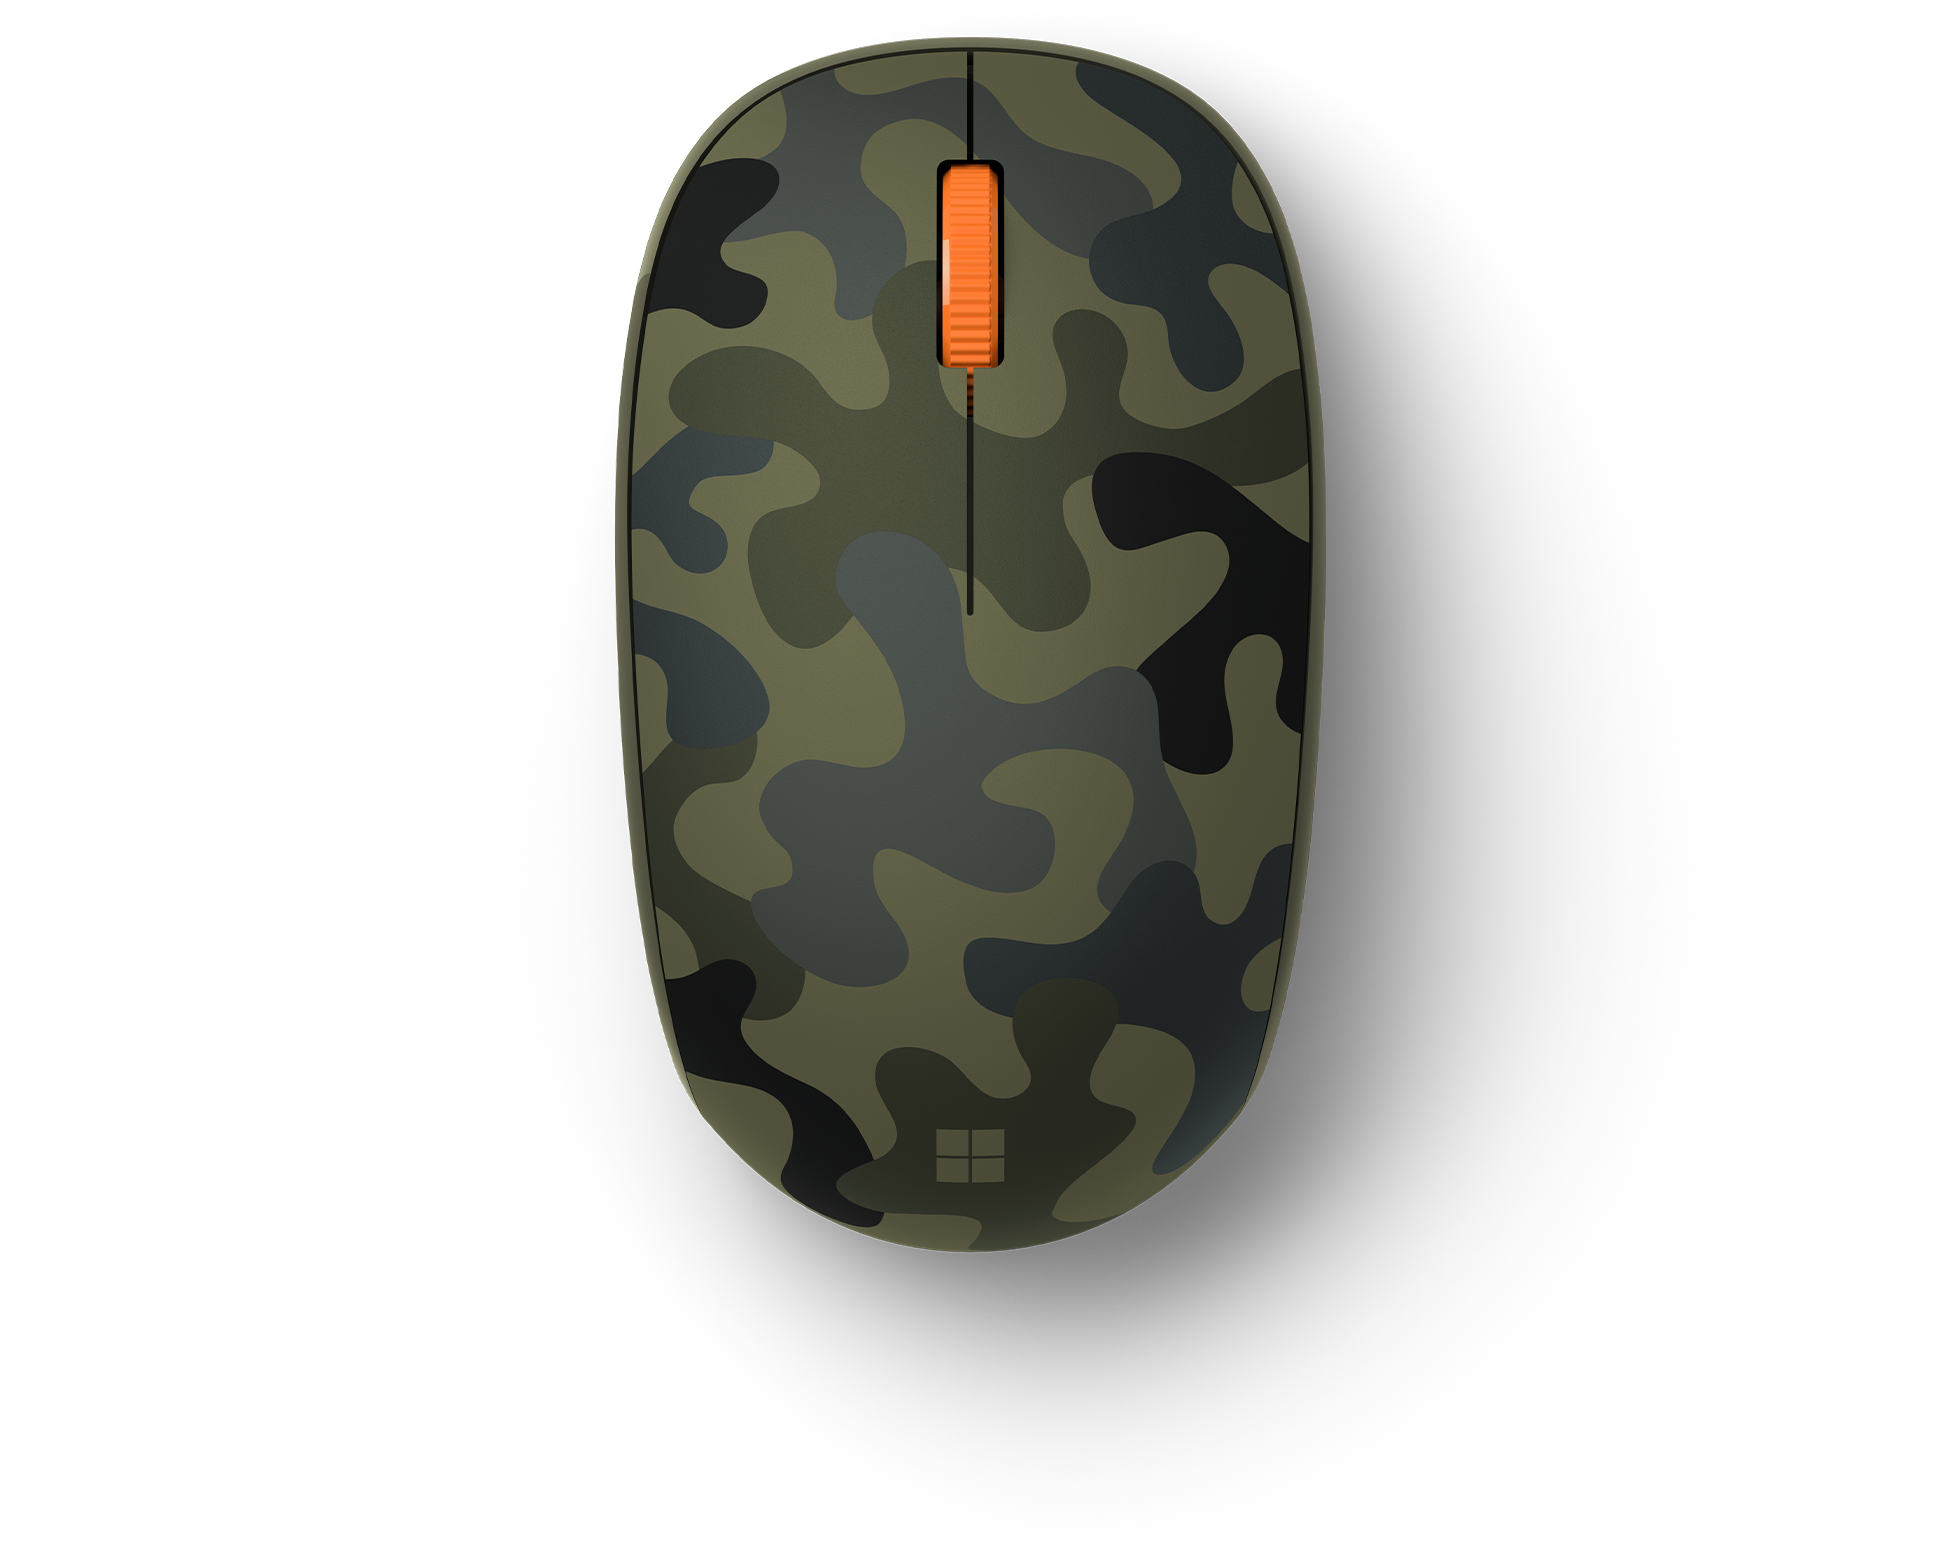 Buy Microsoft Bluetooth Mouse Camo Special Edition - Microsoft Store